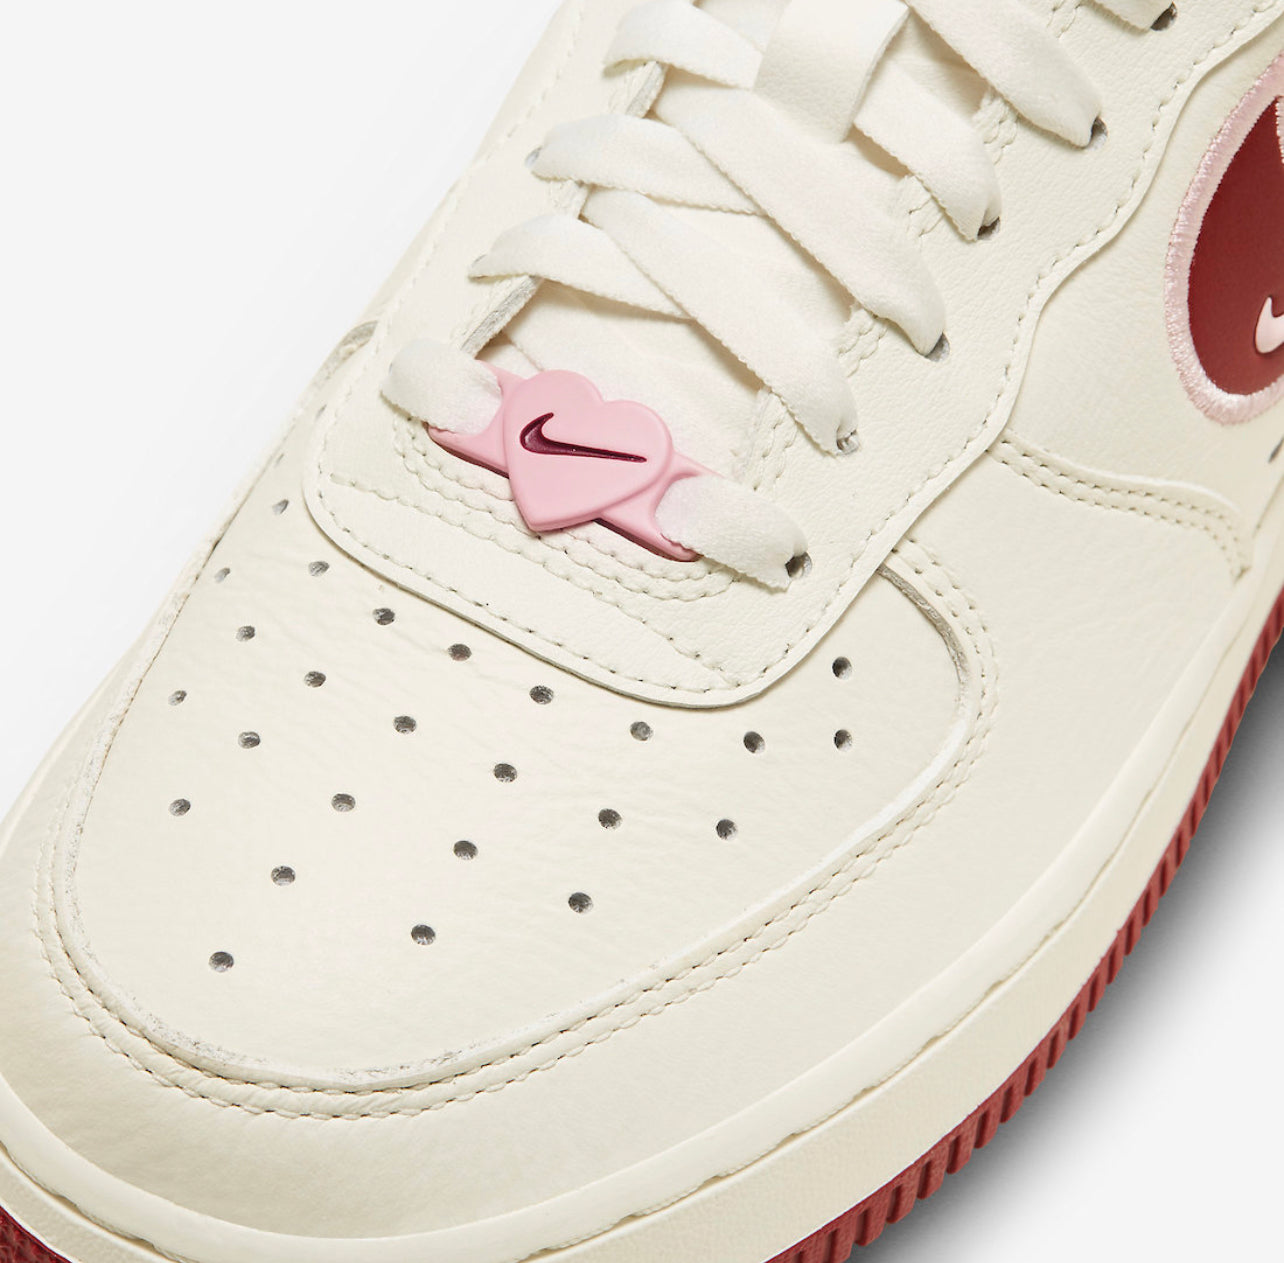 Air Force 1 Low Valentine’s Day 1